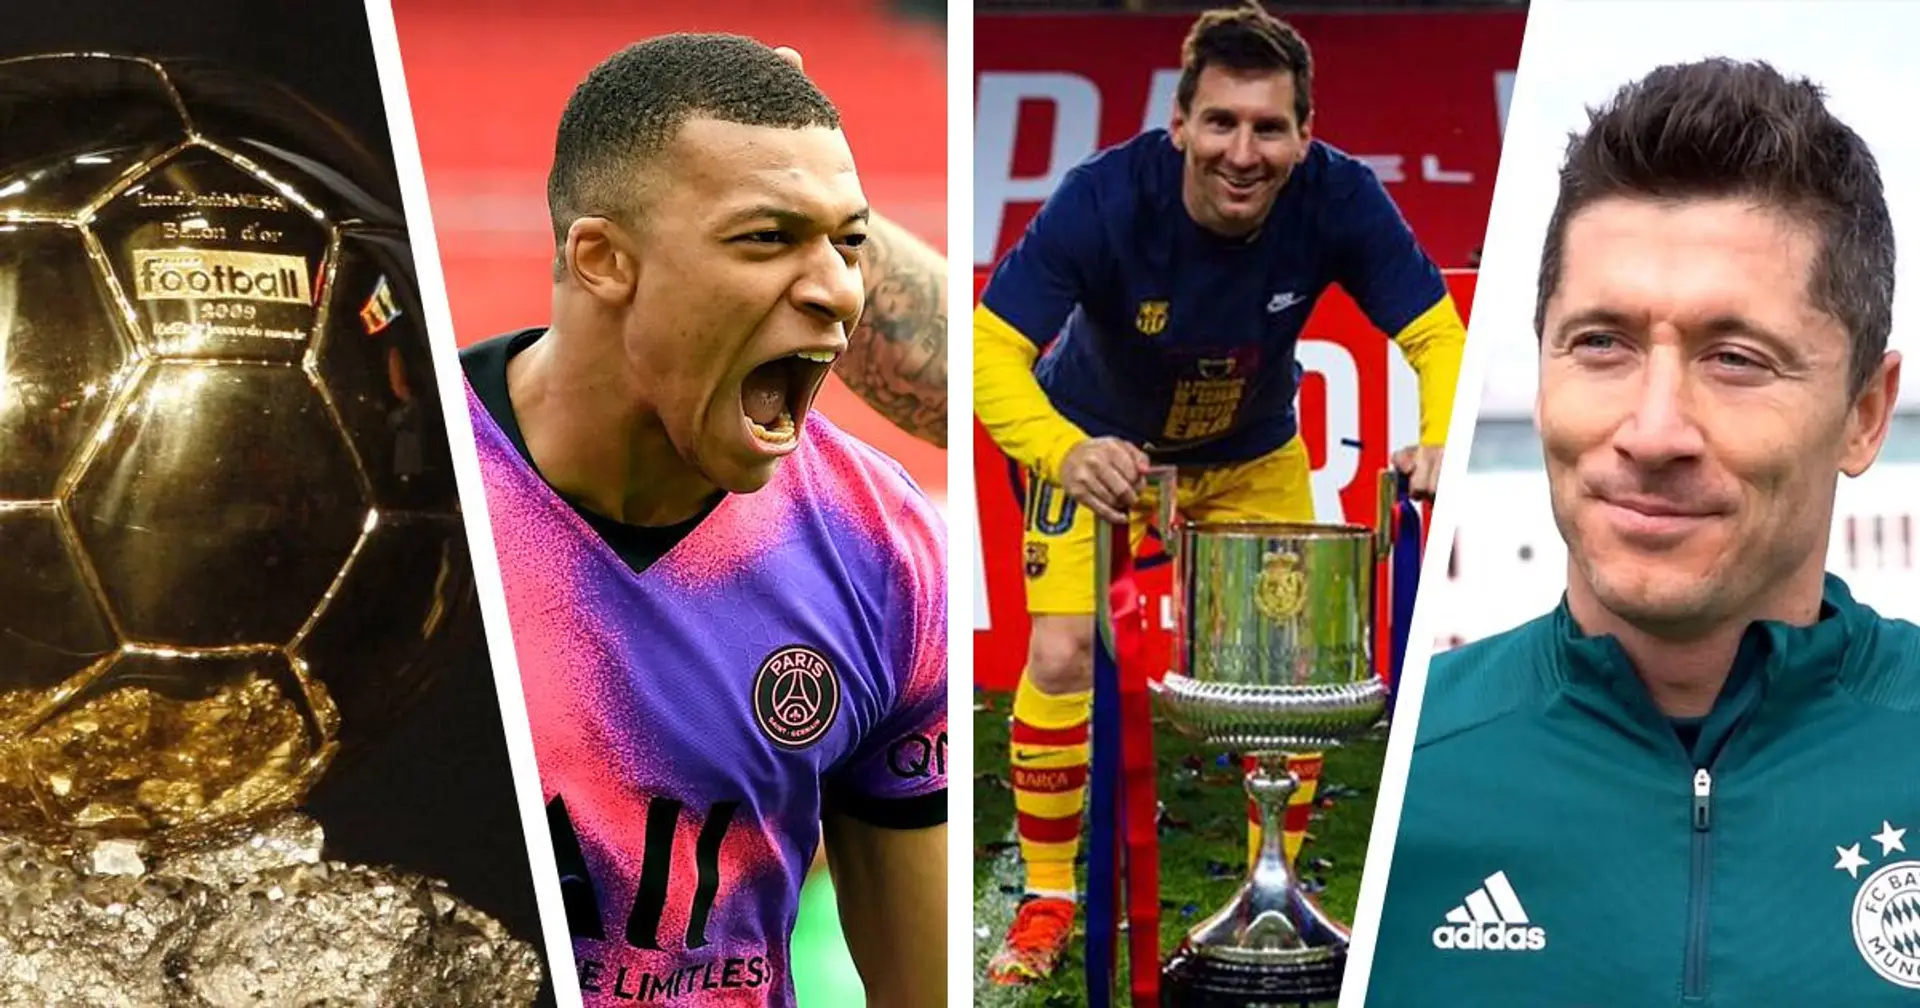 Ballon d'Or power rankings: Messi returns to 2nd while Mbappe jumps to top